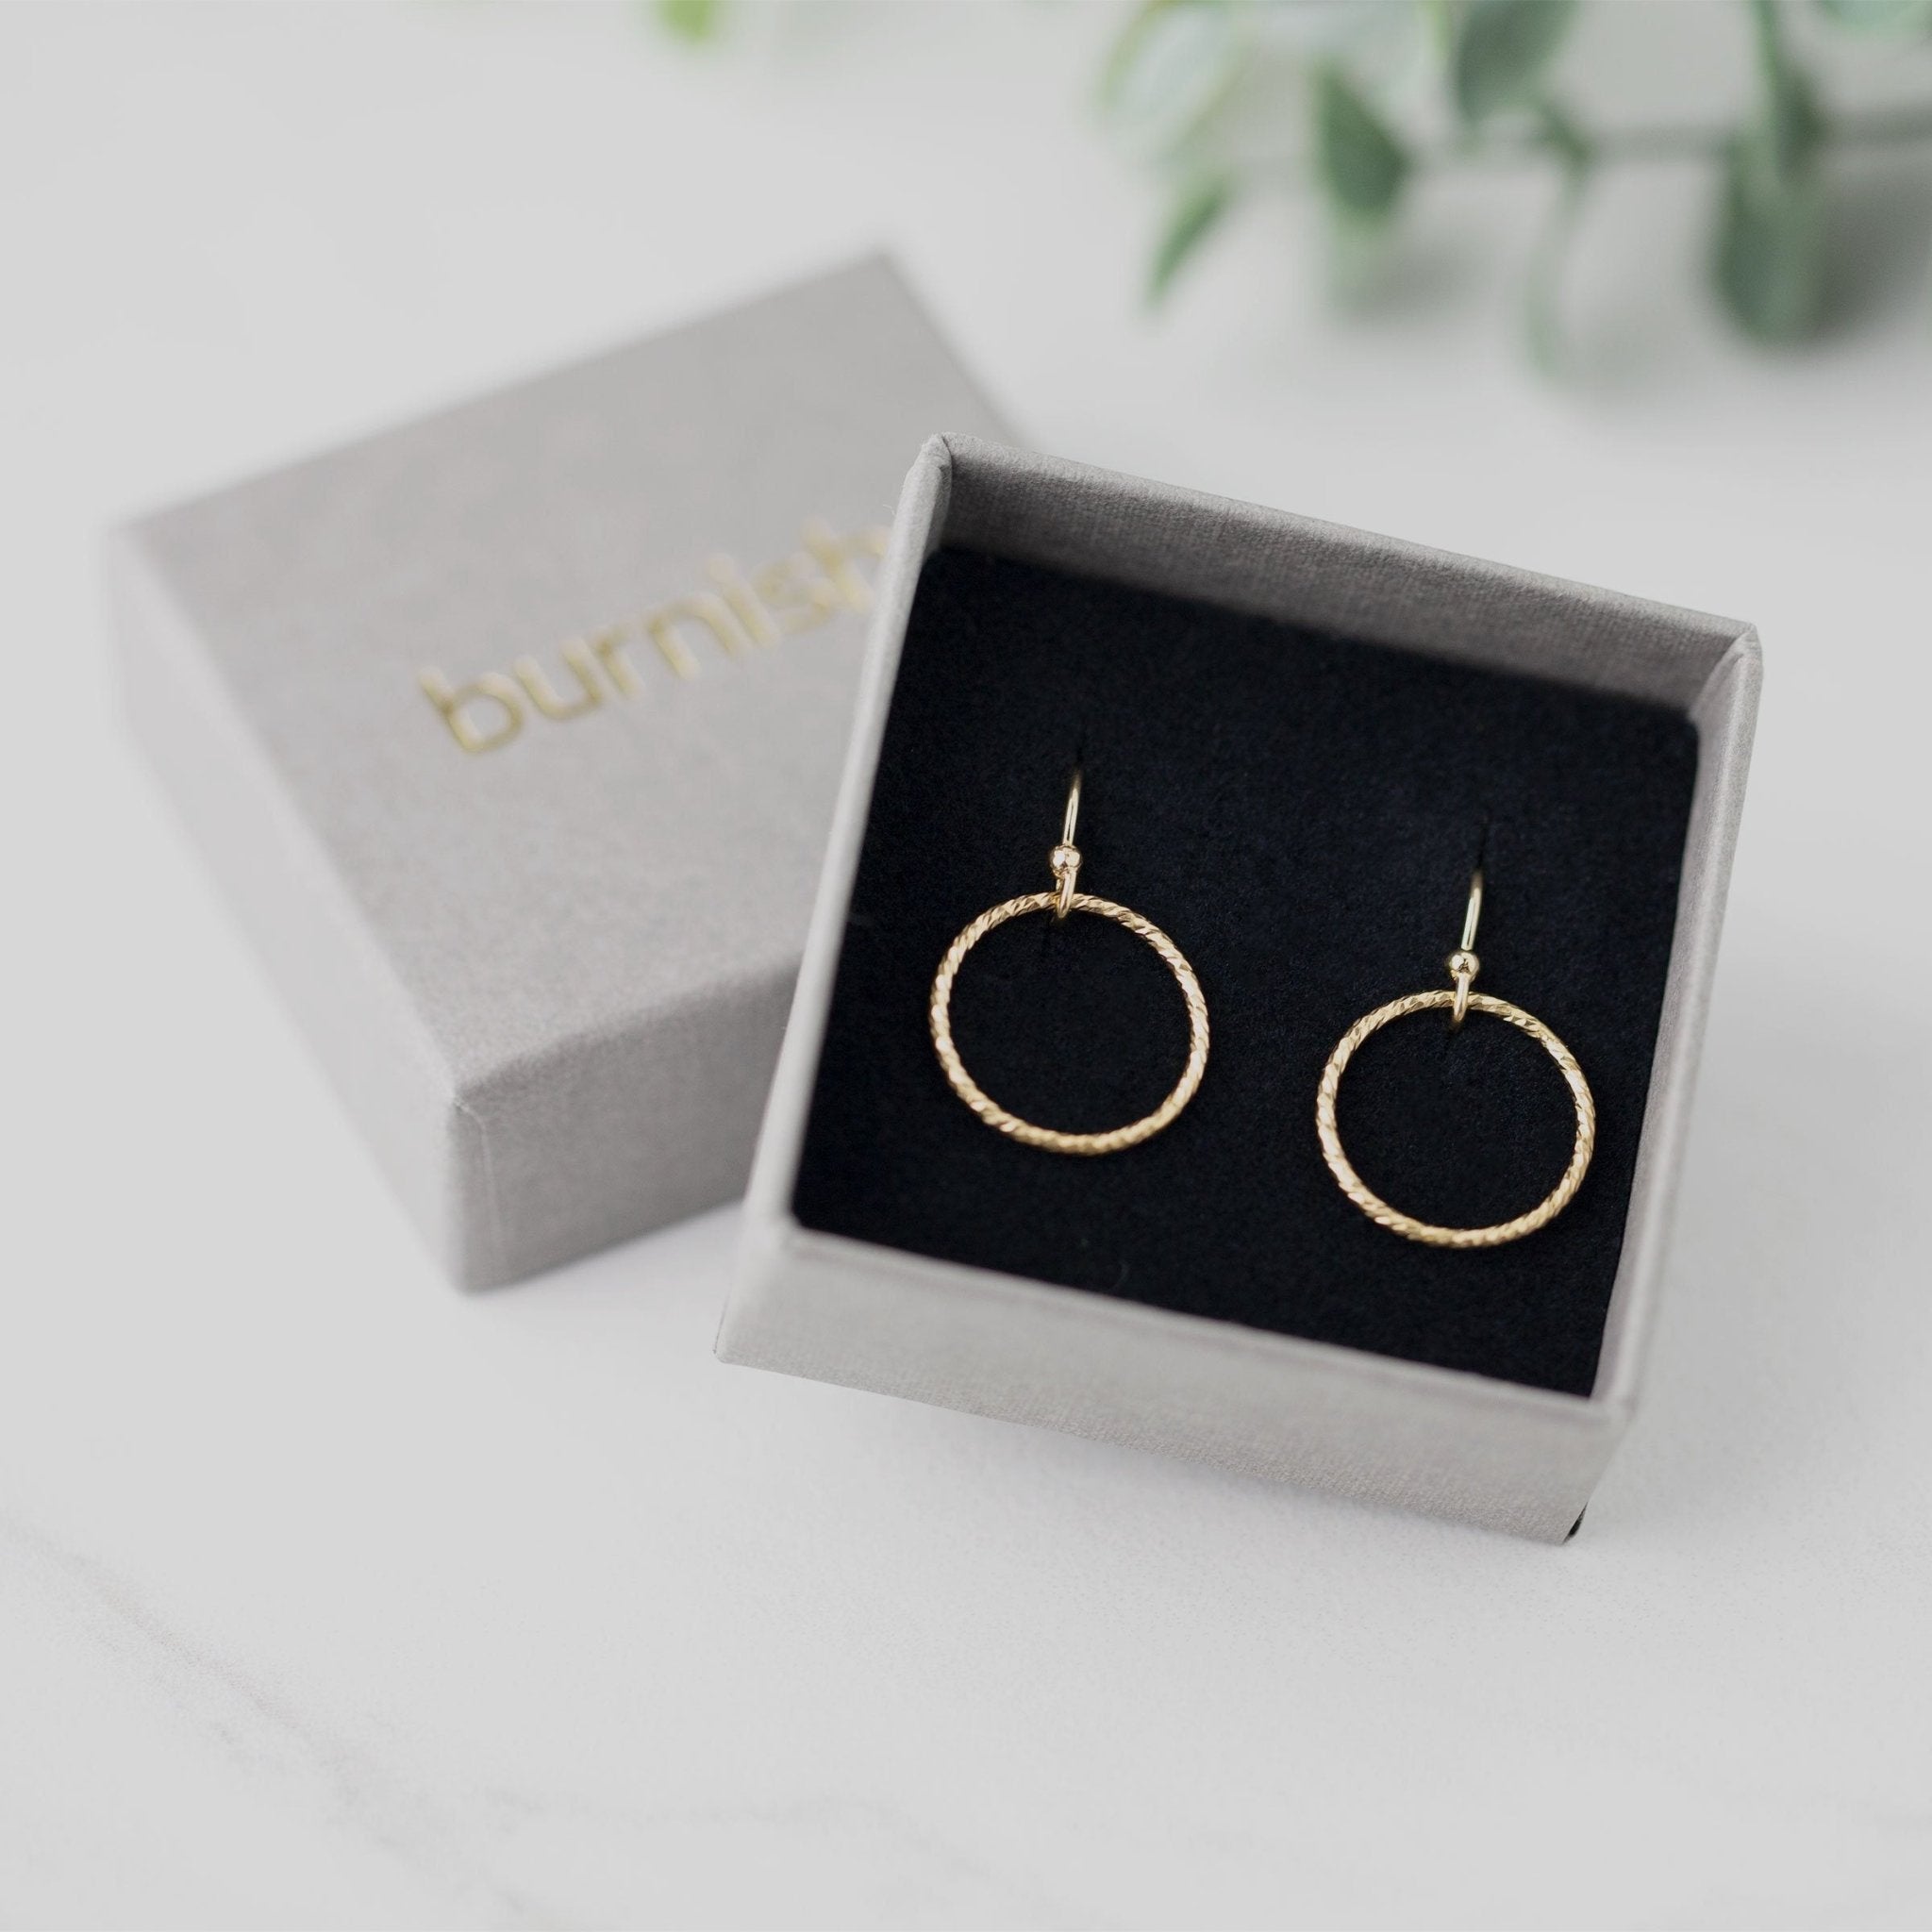 Gold Sparkle Circle Earrings - Handmade Jewelry by Burnish